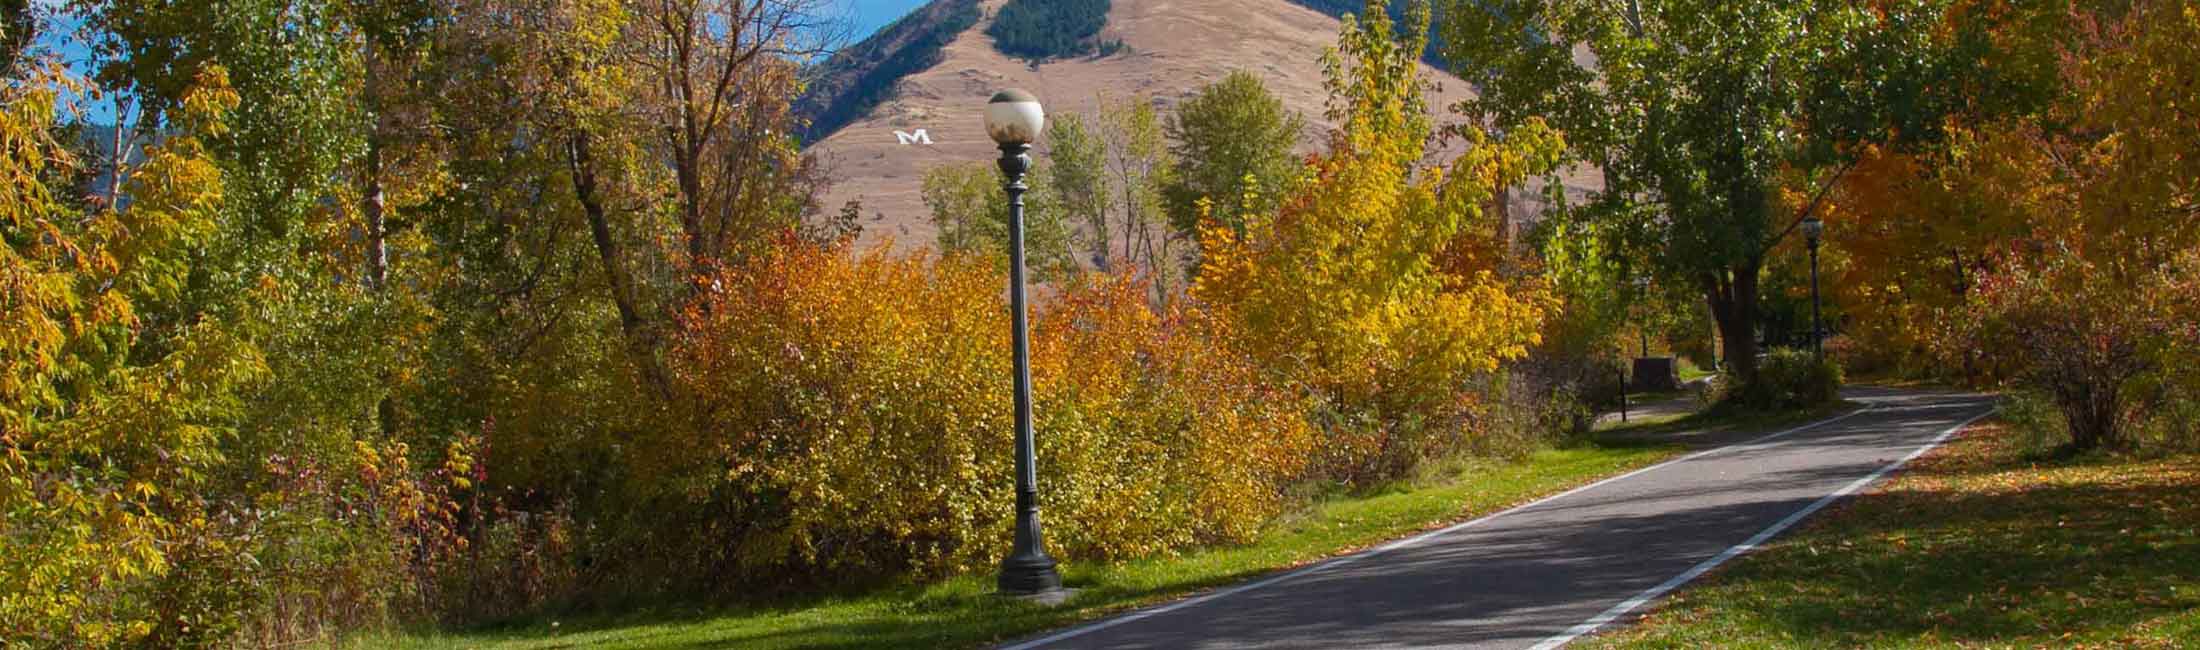 Top 10 Places to View the Fall Foliage in Missoula